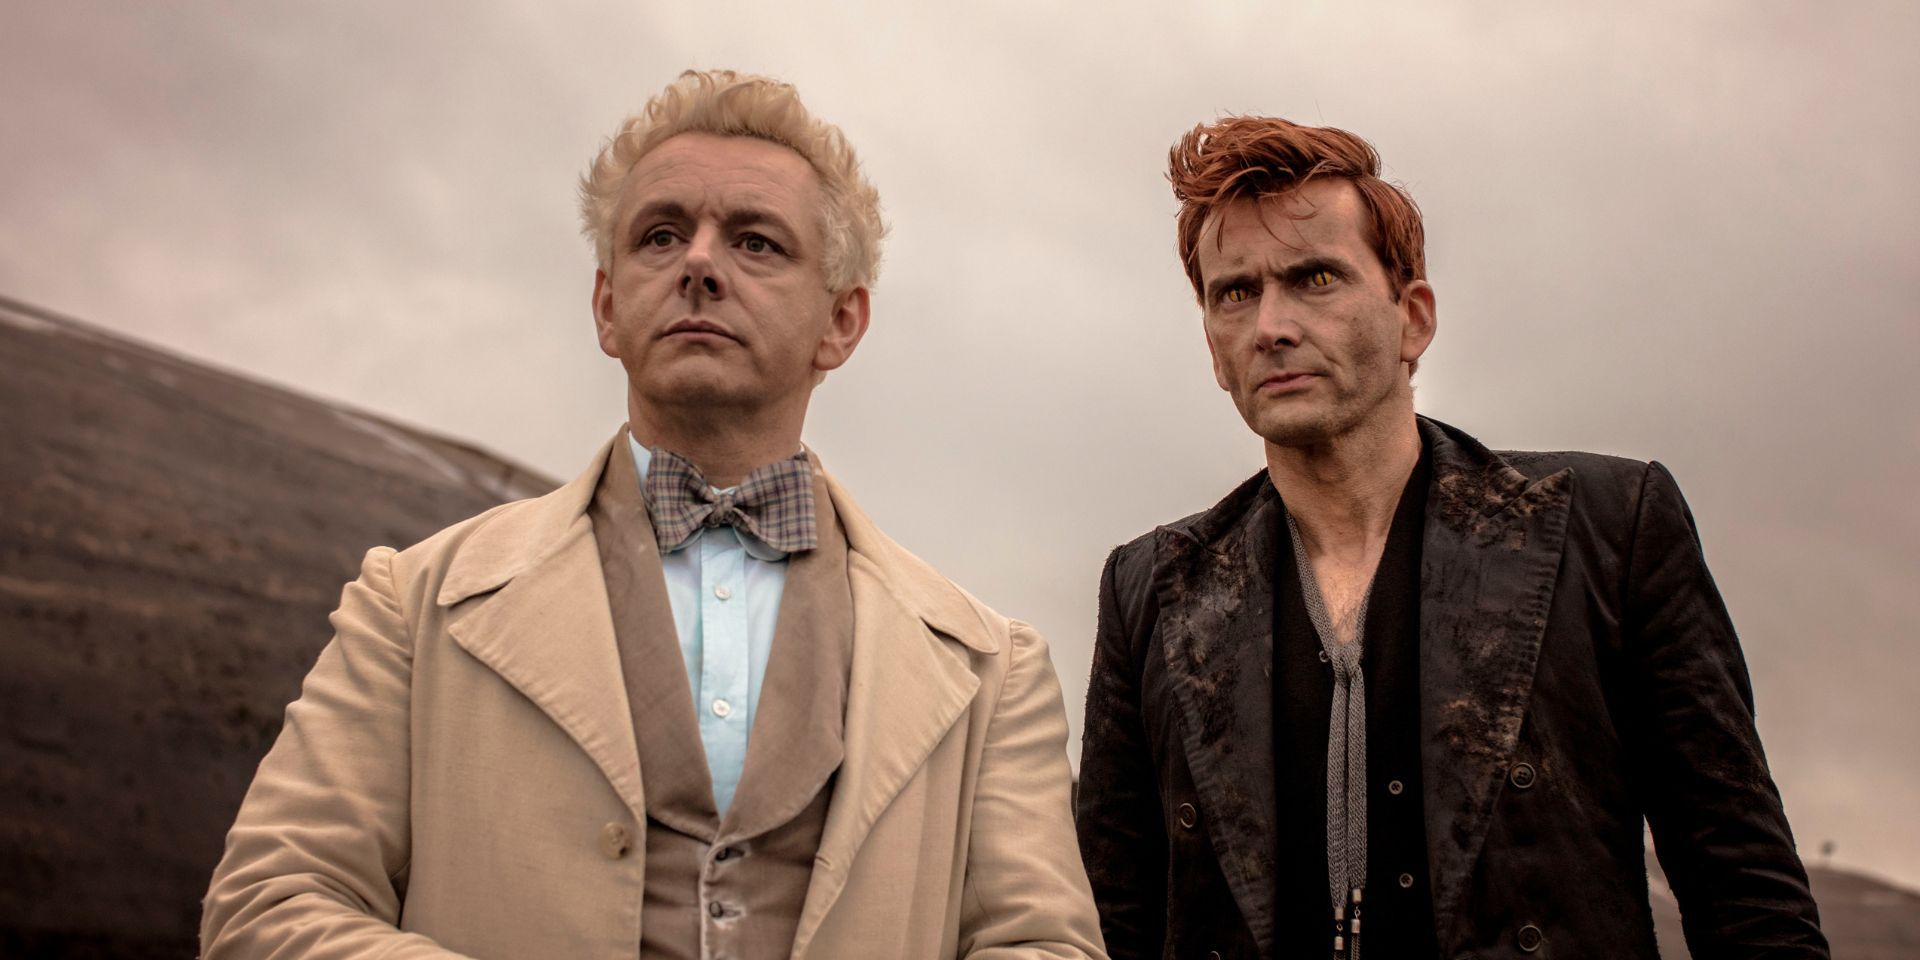 Sheen and Tennant playing Aziraphale and Crowley in Good Omens